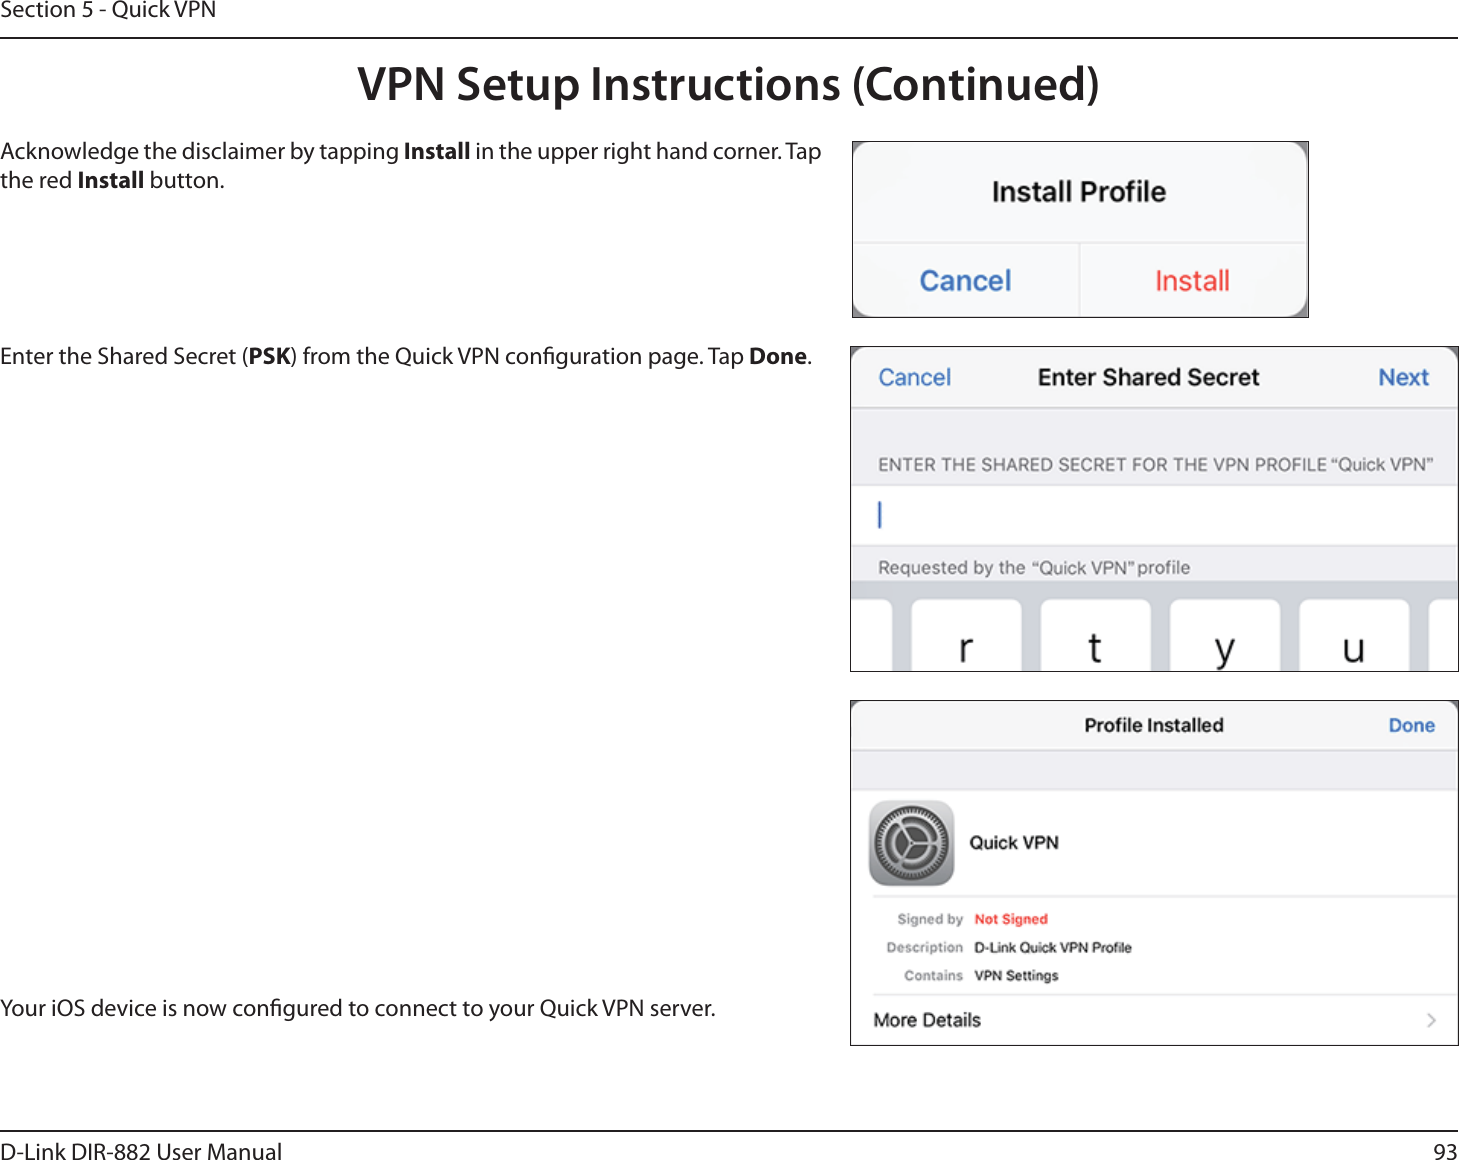 93D-Link DIR-882 User ManualSection 5 - Quick VPNYour iOS device is now congured to connect to your Quick VPN server.Enter the Shared Secret (PSK) from the Quick VPN conguration page. Tap Done.Acknowledge the disclaimer by tapping Install in the upper right hand corner. Tap the red Install button.VPN Setup Instructions (Continued)